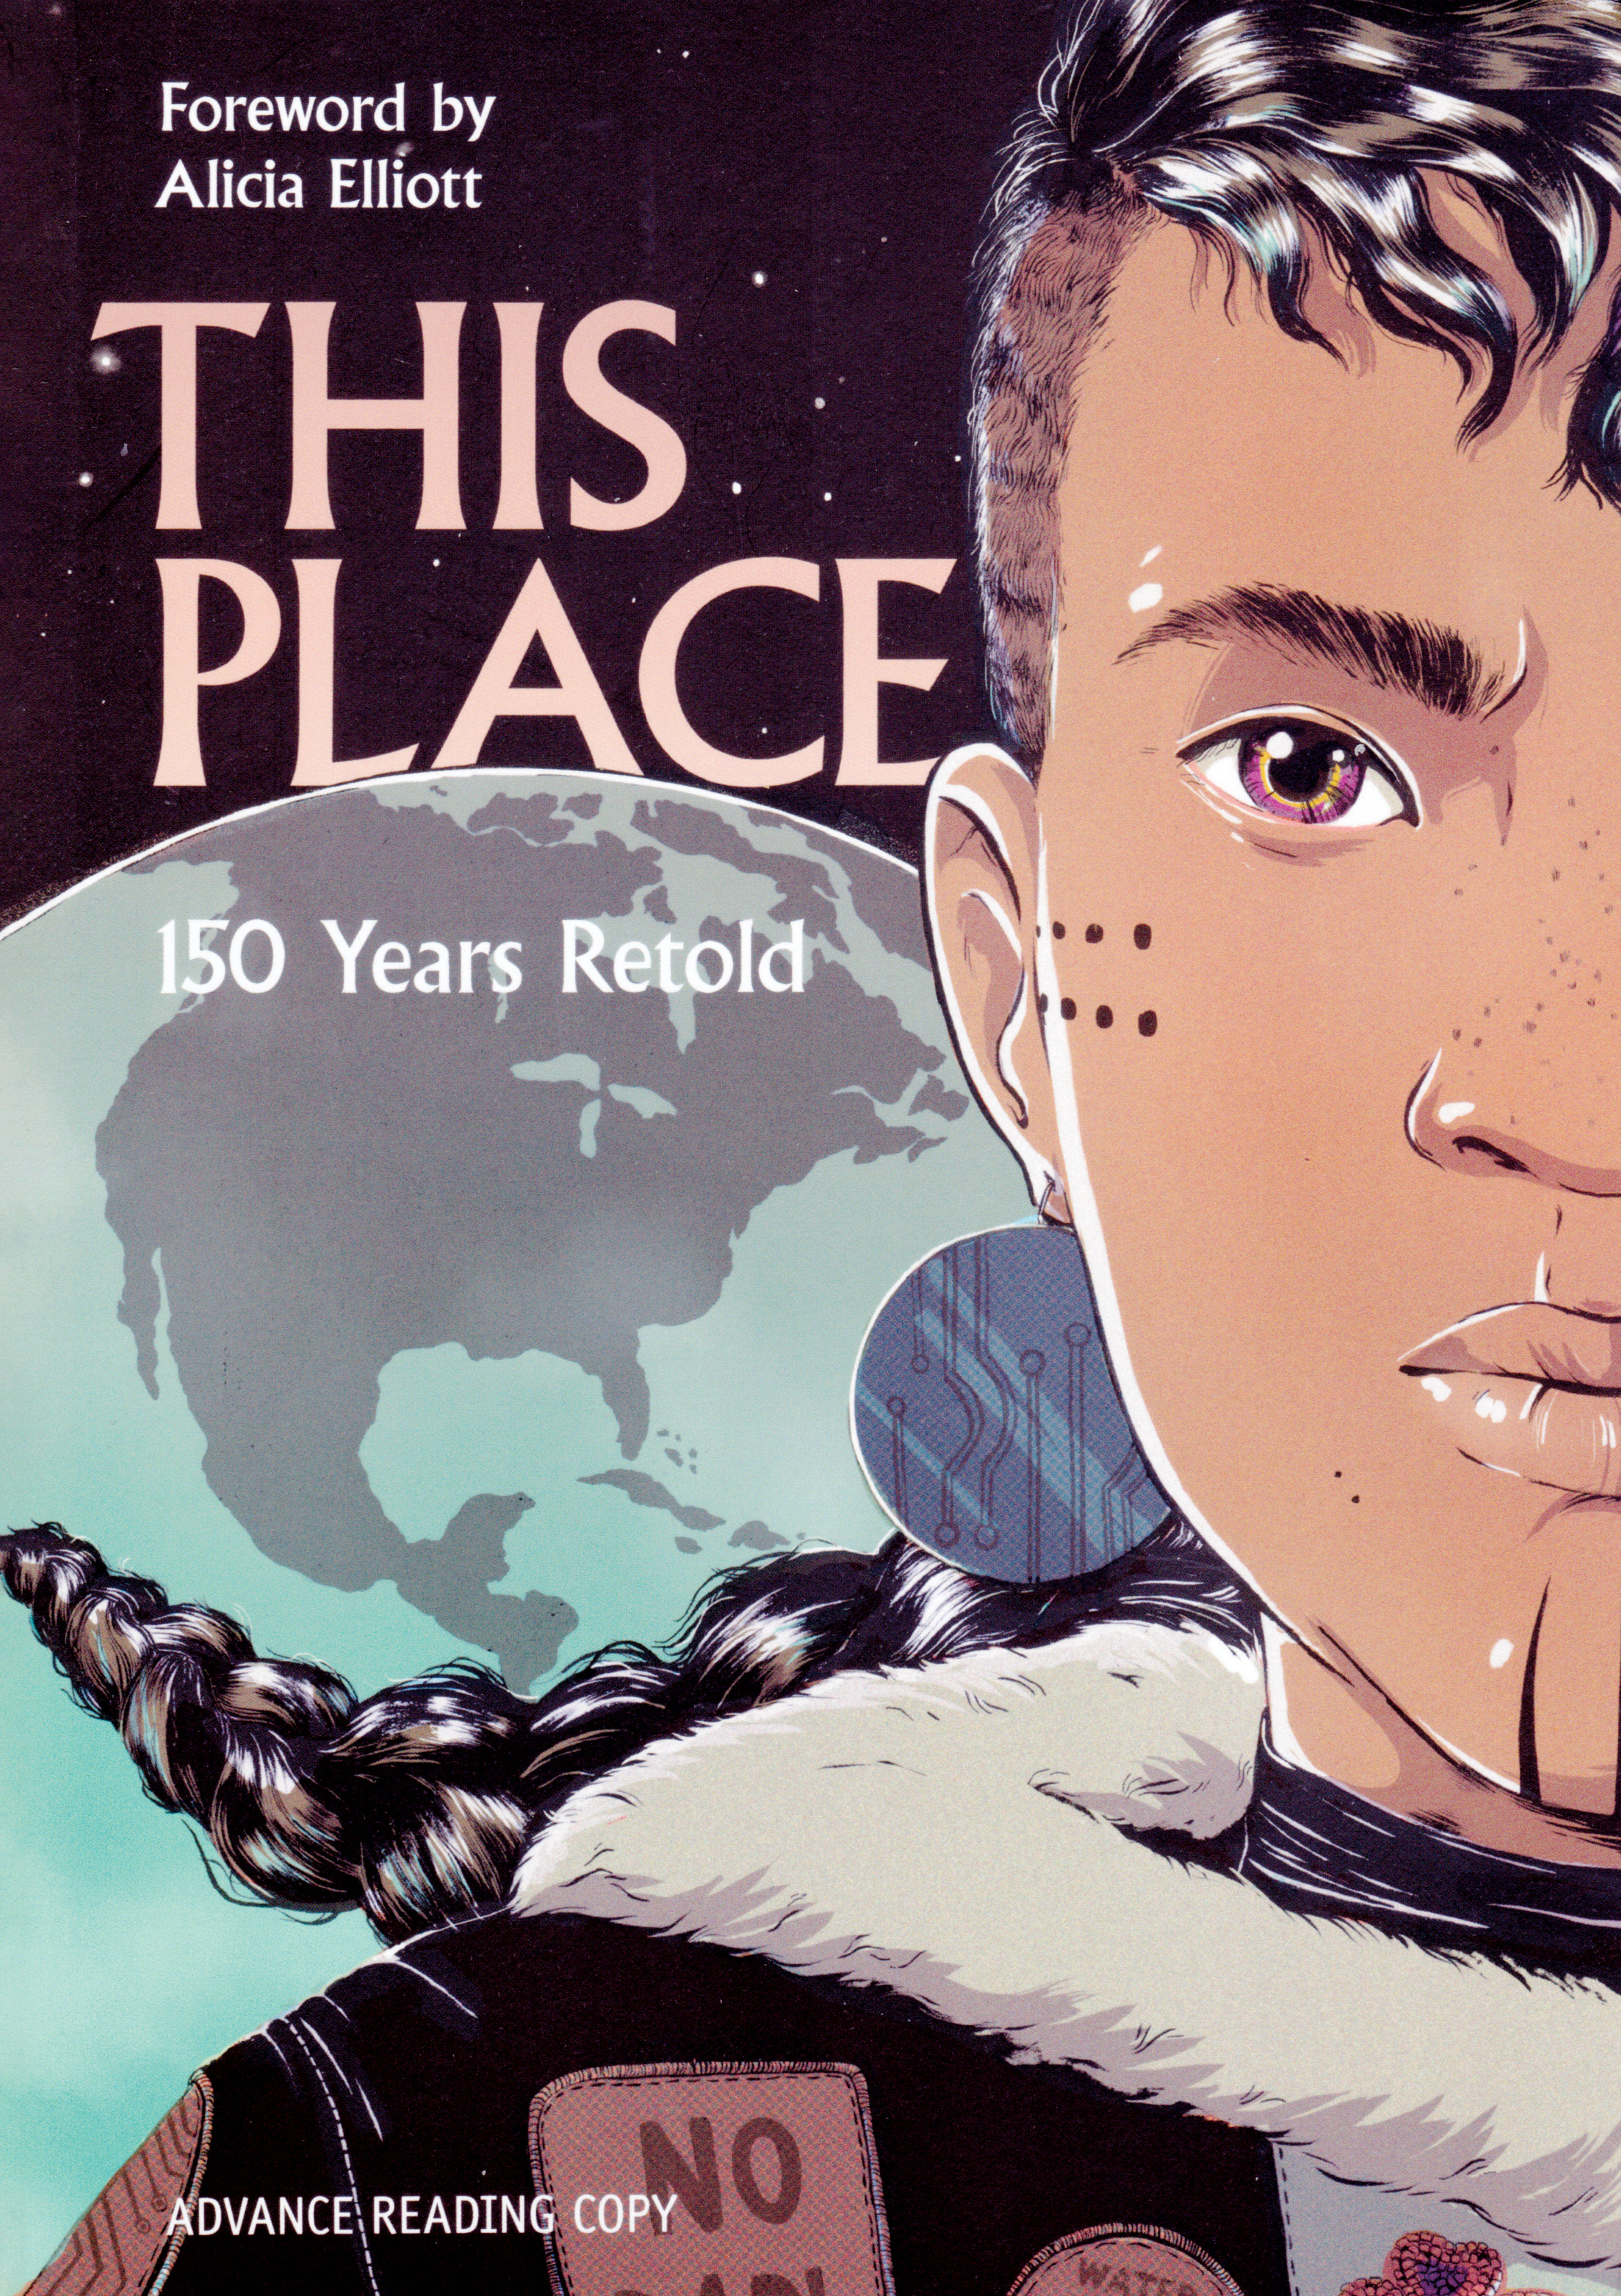 Book cover of ‘This Place’.